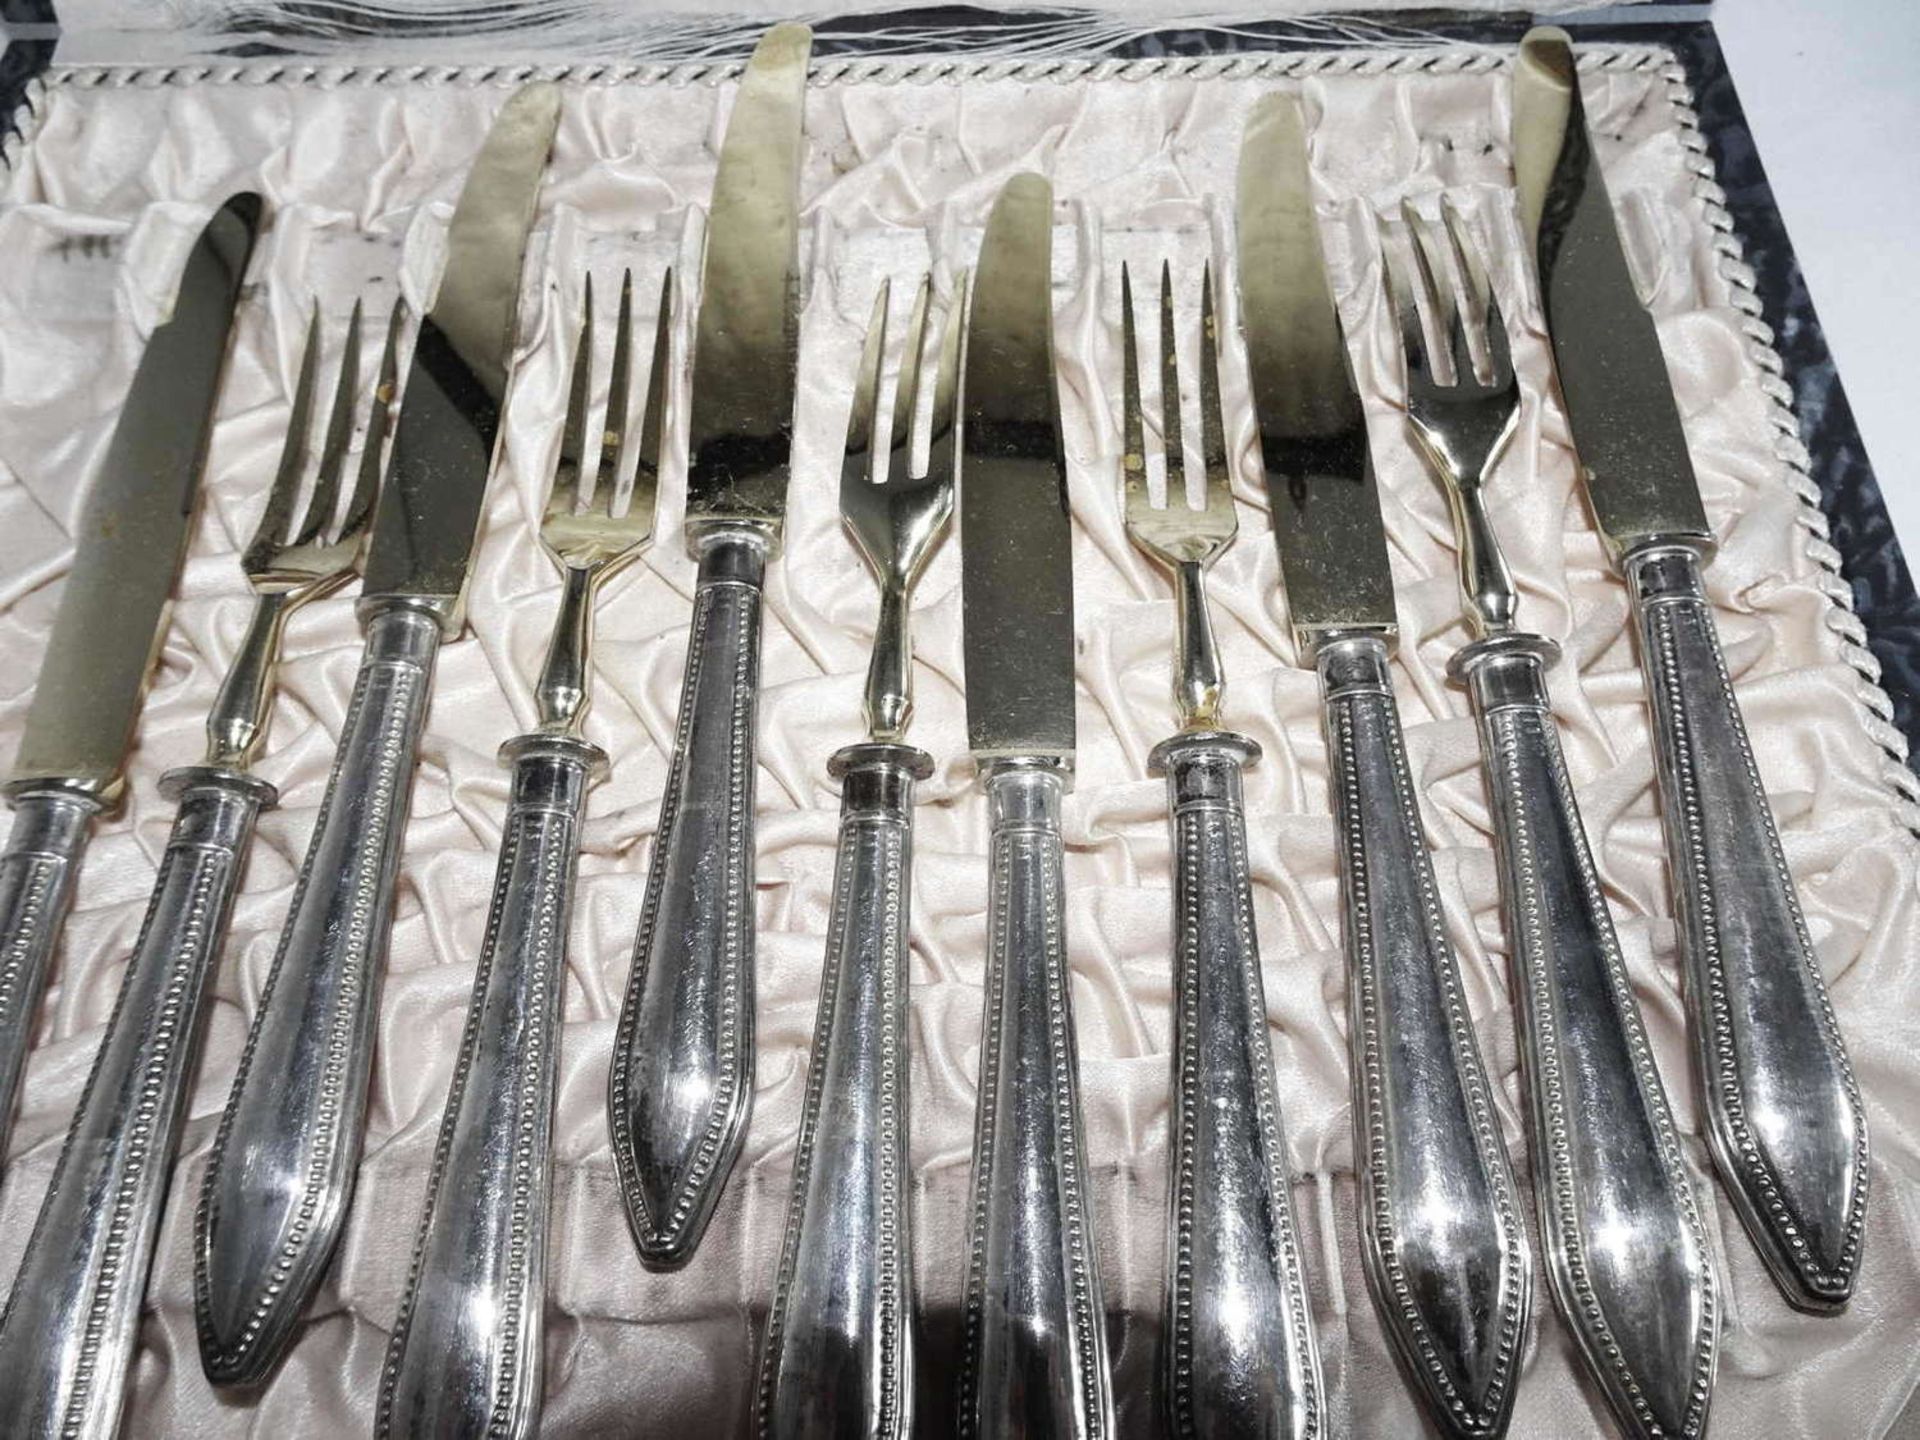 Silver cutlery in the box (1 fork missing). A total of 6 knives and 5 forks.Silberbesteck im - Bild 2 aus 3